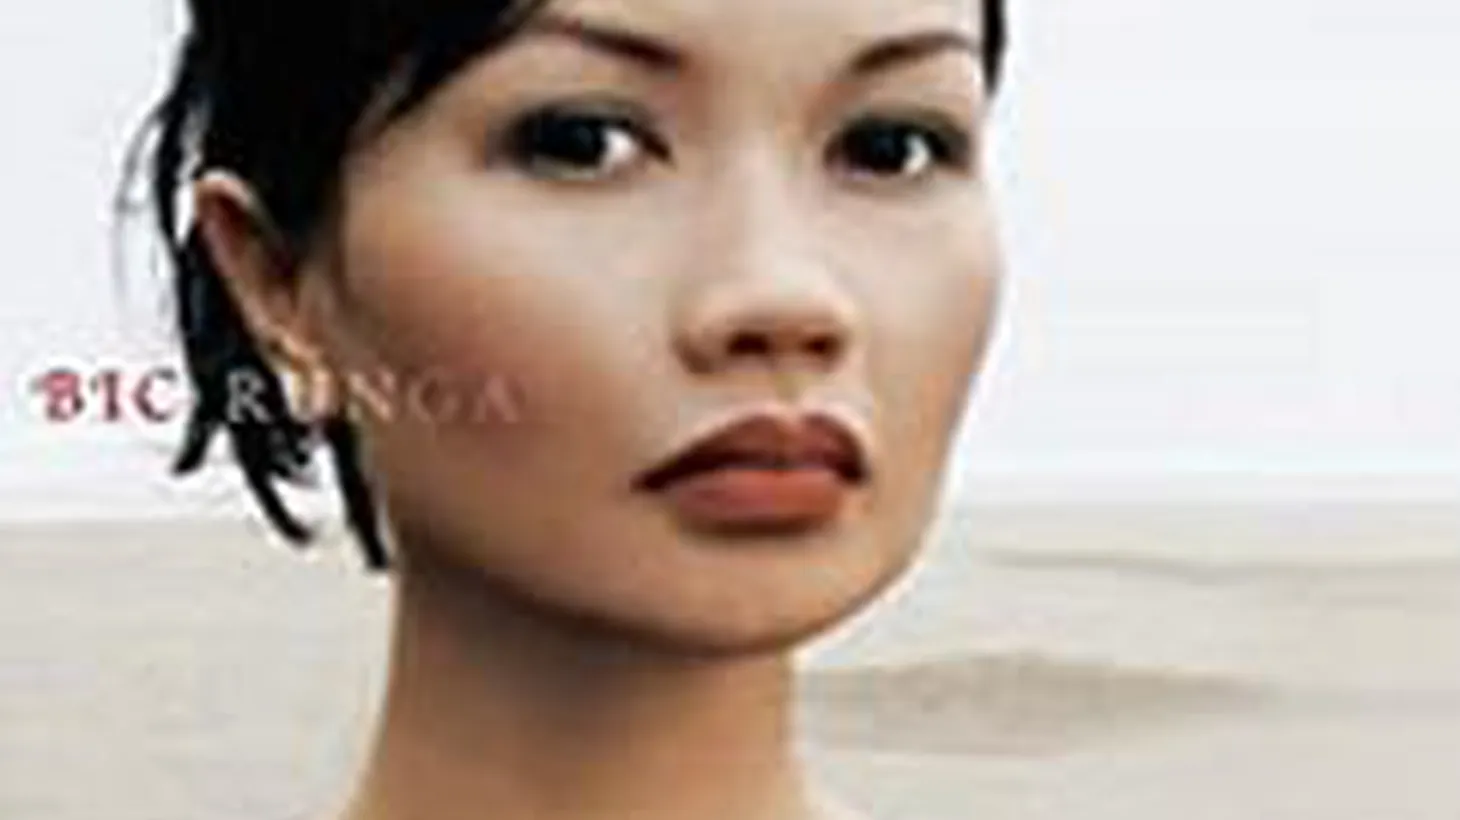 Winner of the Silver Scroll award in her native New Zealand for excellence in songwriting, Bic Runga  brings her music to Morning Becomes Eclectic.